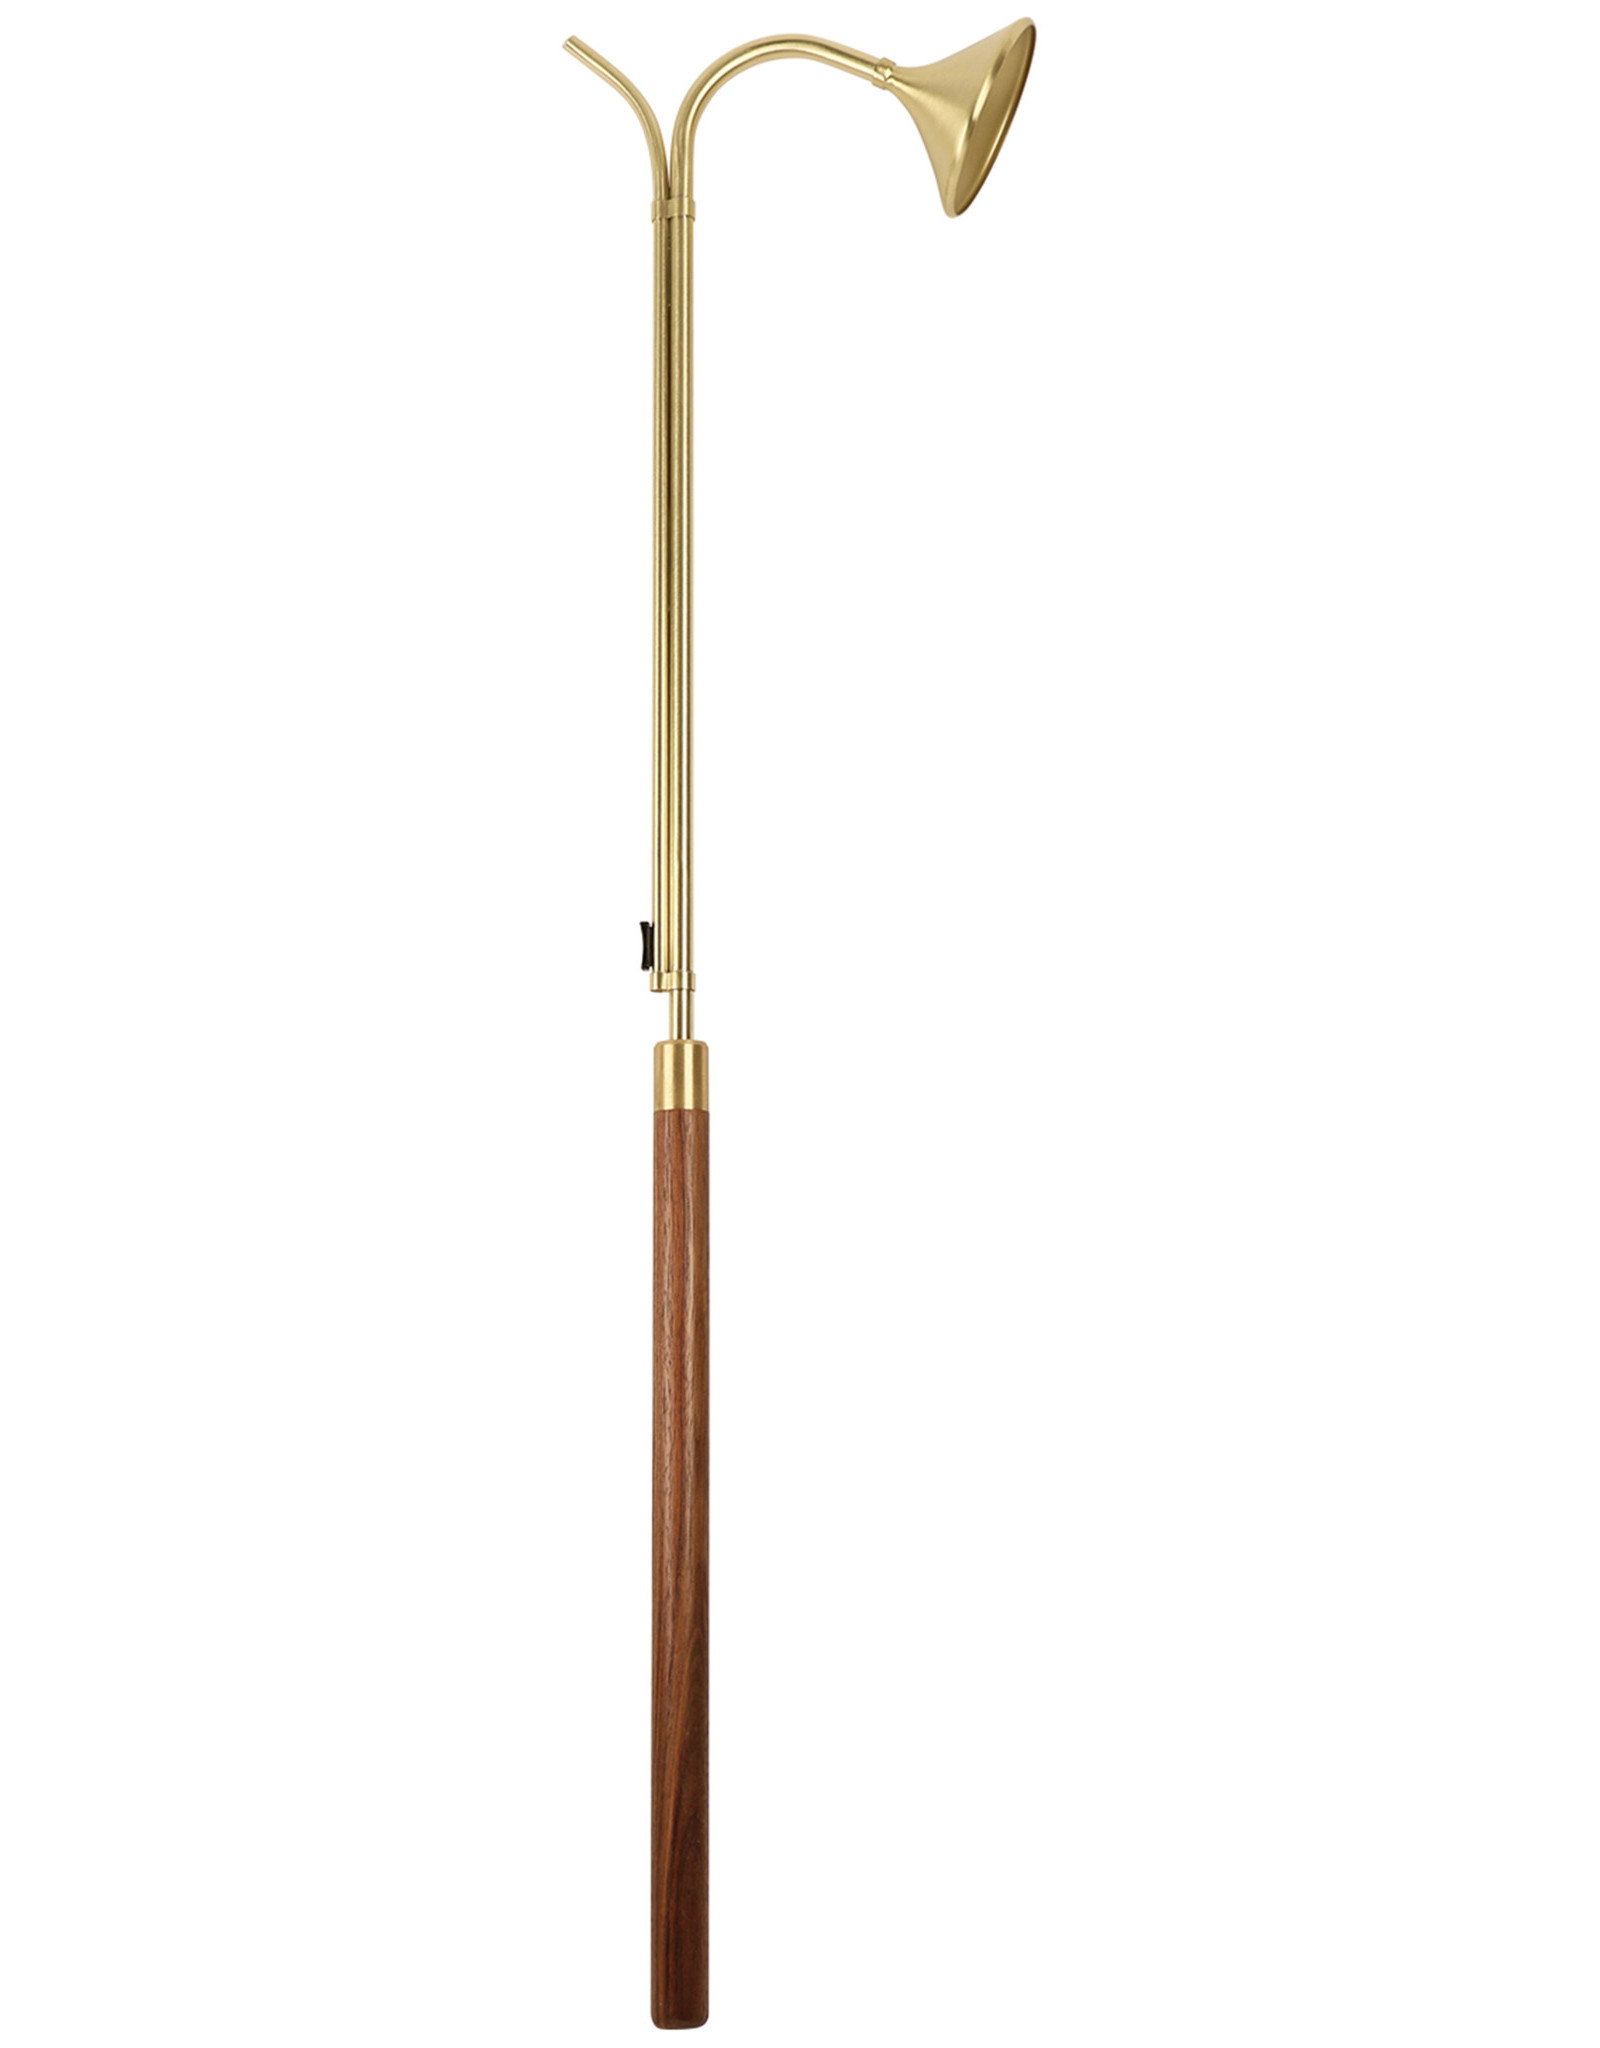 Koleys Candlelighter - Solid Brass with Walnut Handle - 36" Length/Large 3.5" Diameter Snuffer